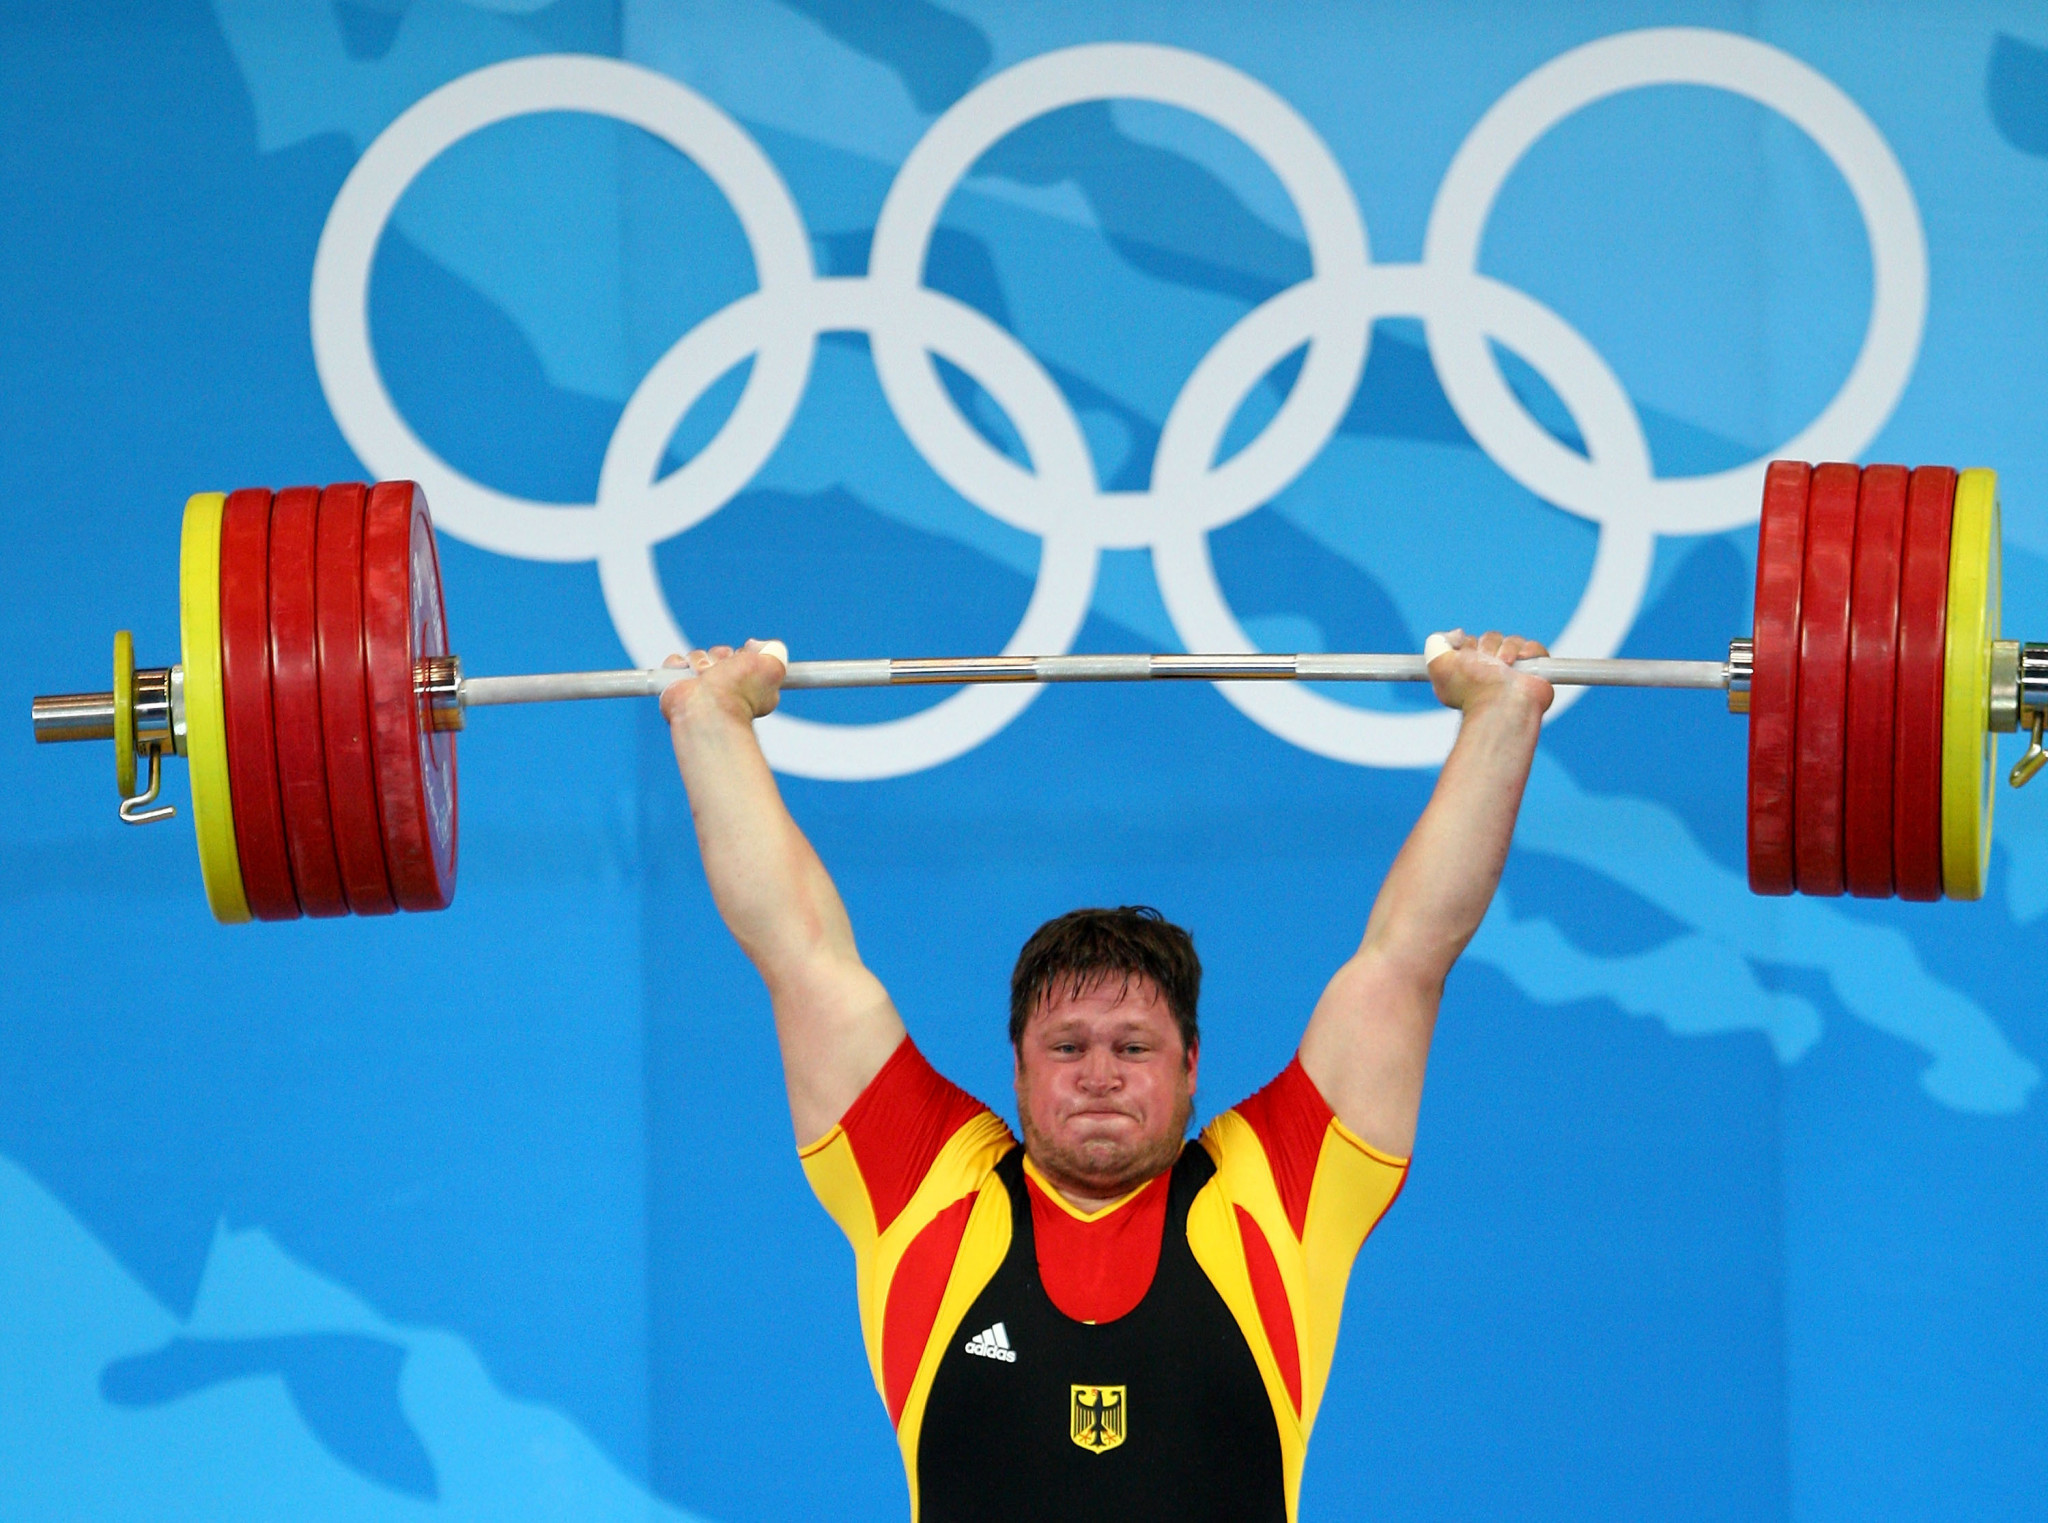 Matthias Steiner was Germany's latest Olympic medallist in weightlifting, when he won gold at Beijing 2008 ©Getty Images